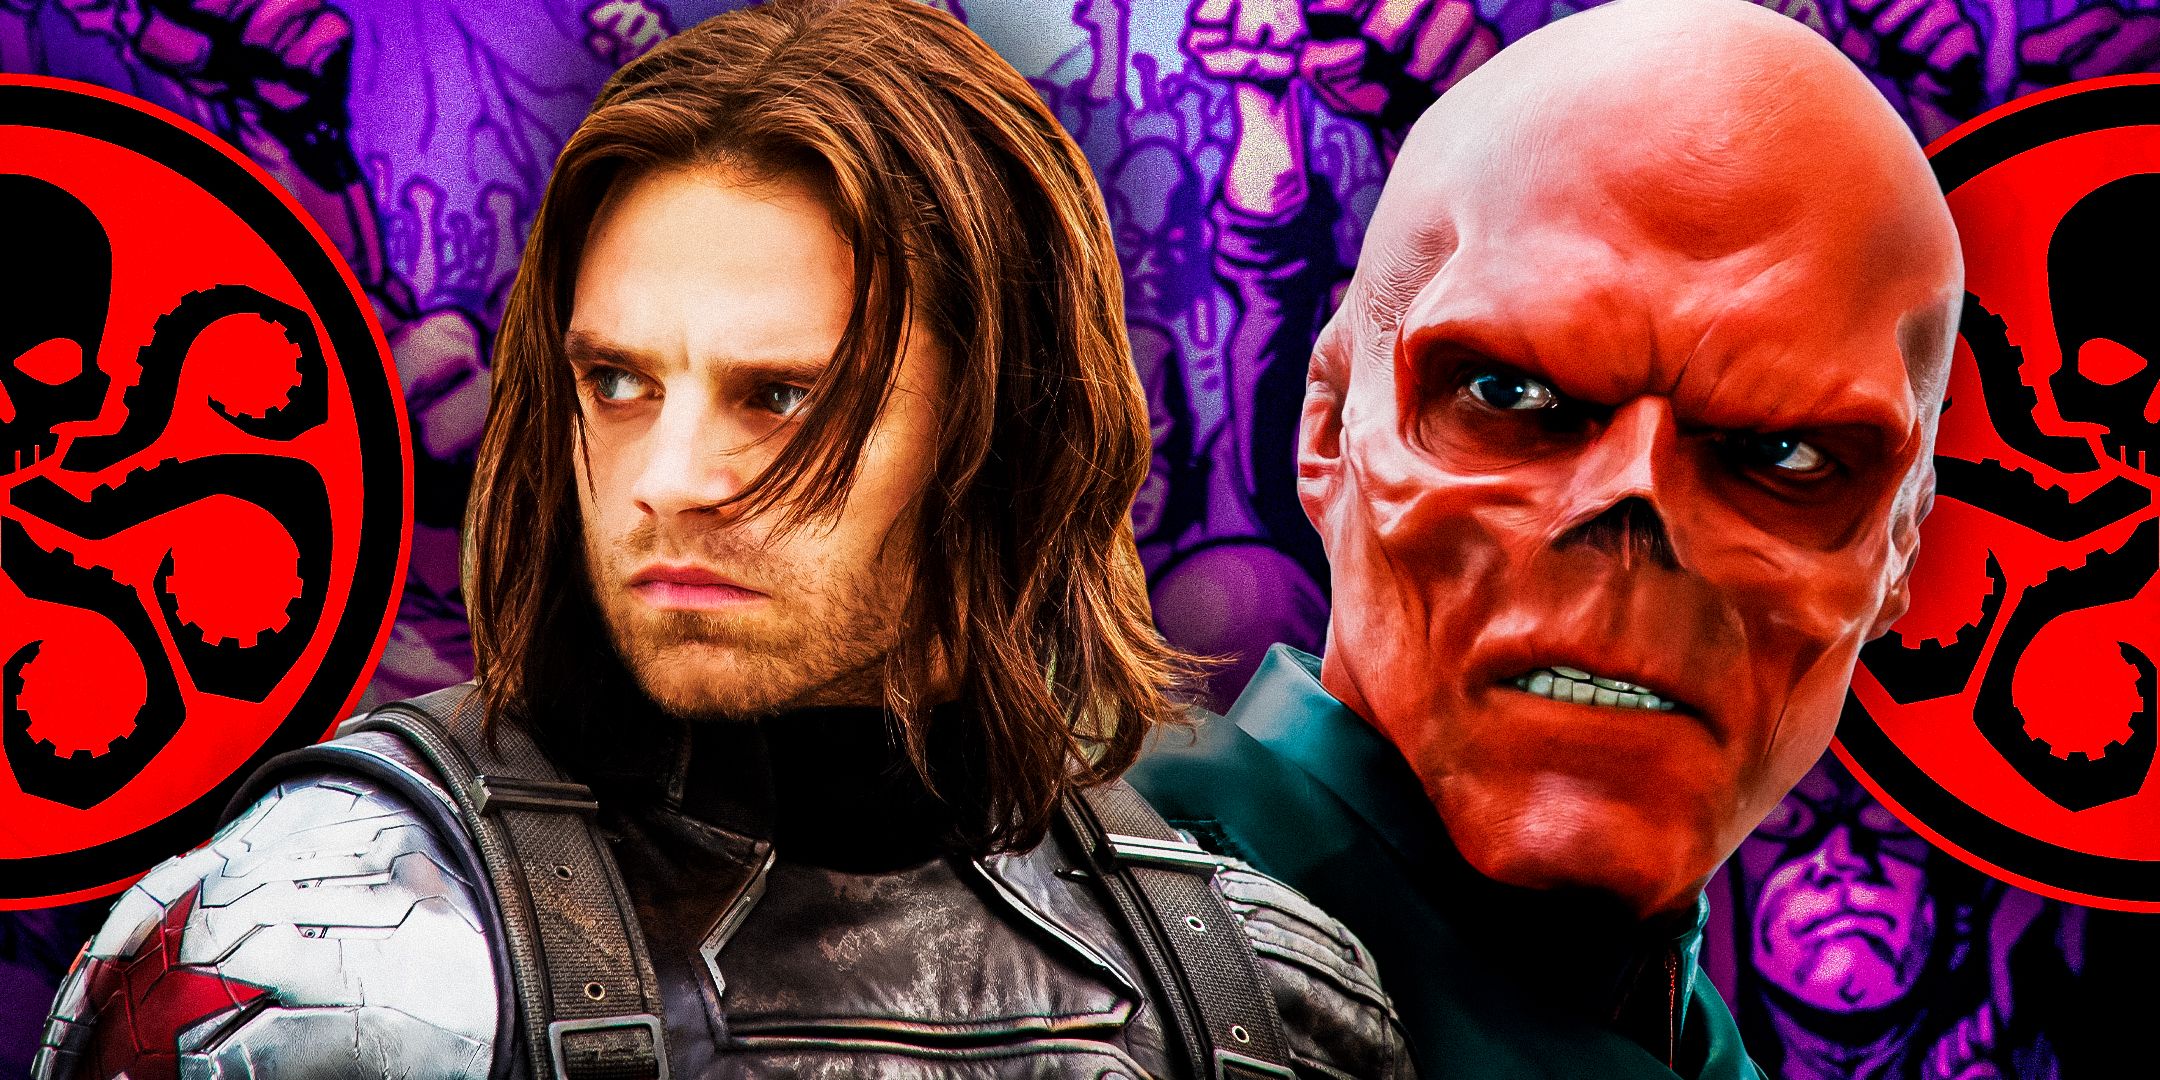 Bucky Barnes, aka the Winter Soldier, and Red Skull in front of Hydra imagery in the MCU